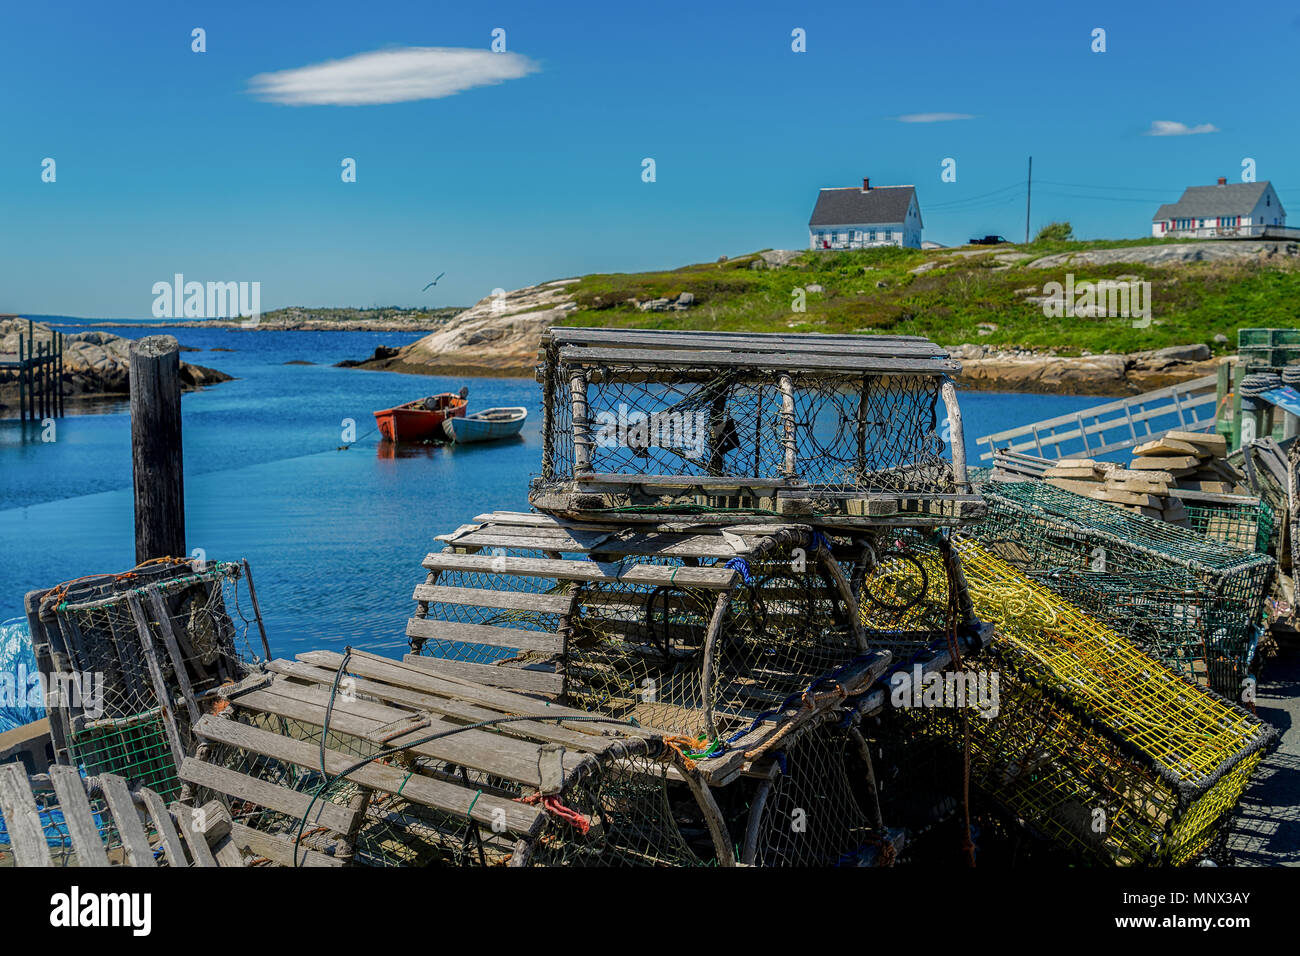 Lobster traps piled on a wharf in Peggy's Cove, Nova Scotia, Canada. Stock Photo